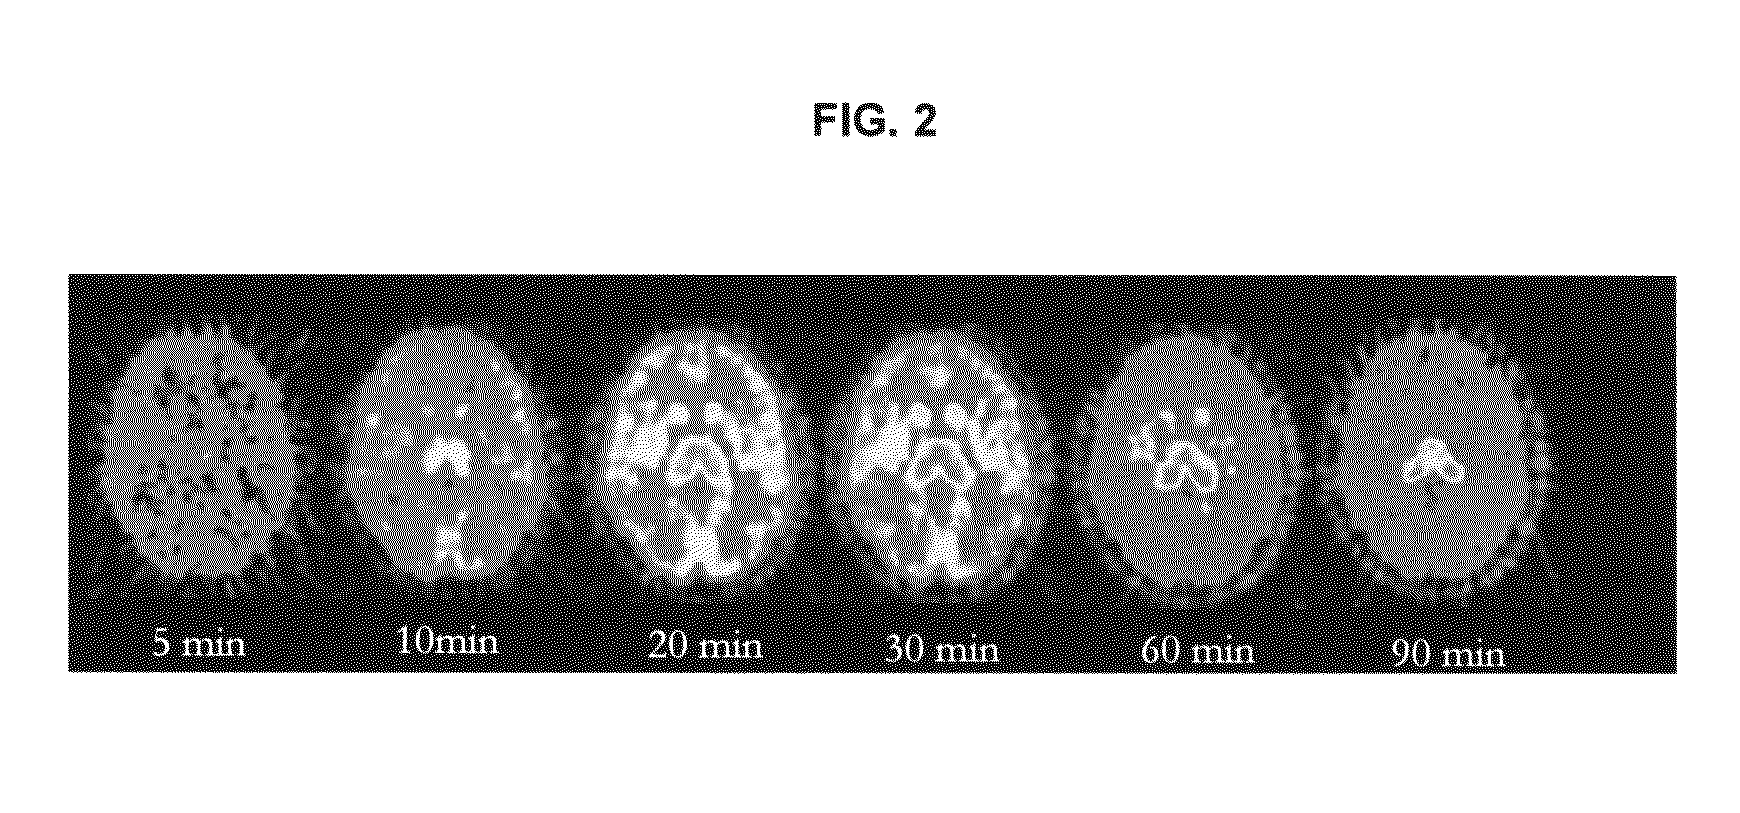 Methods for diagnosing diseases and evaluating treatments therefor using PET